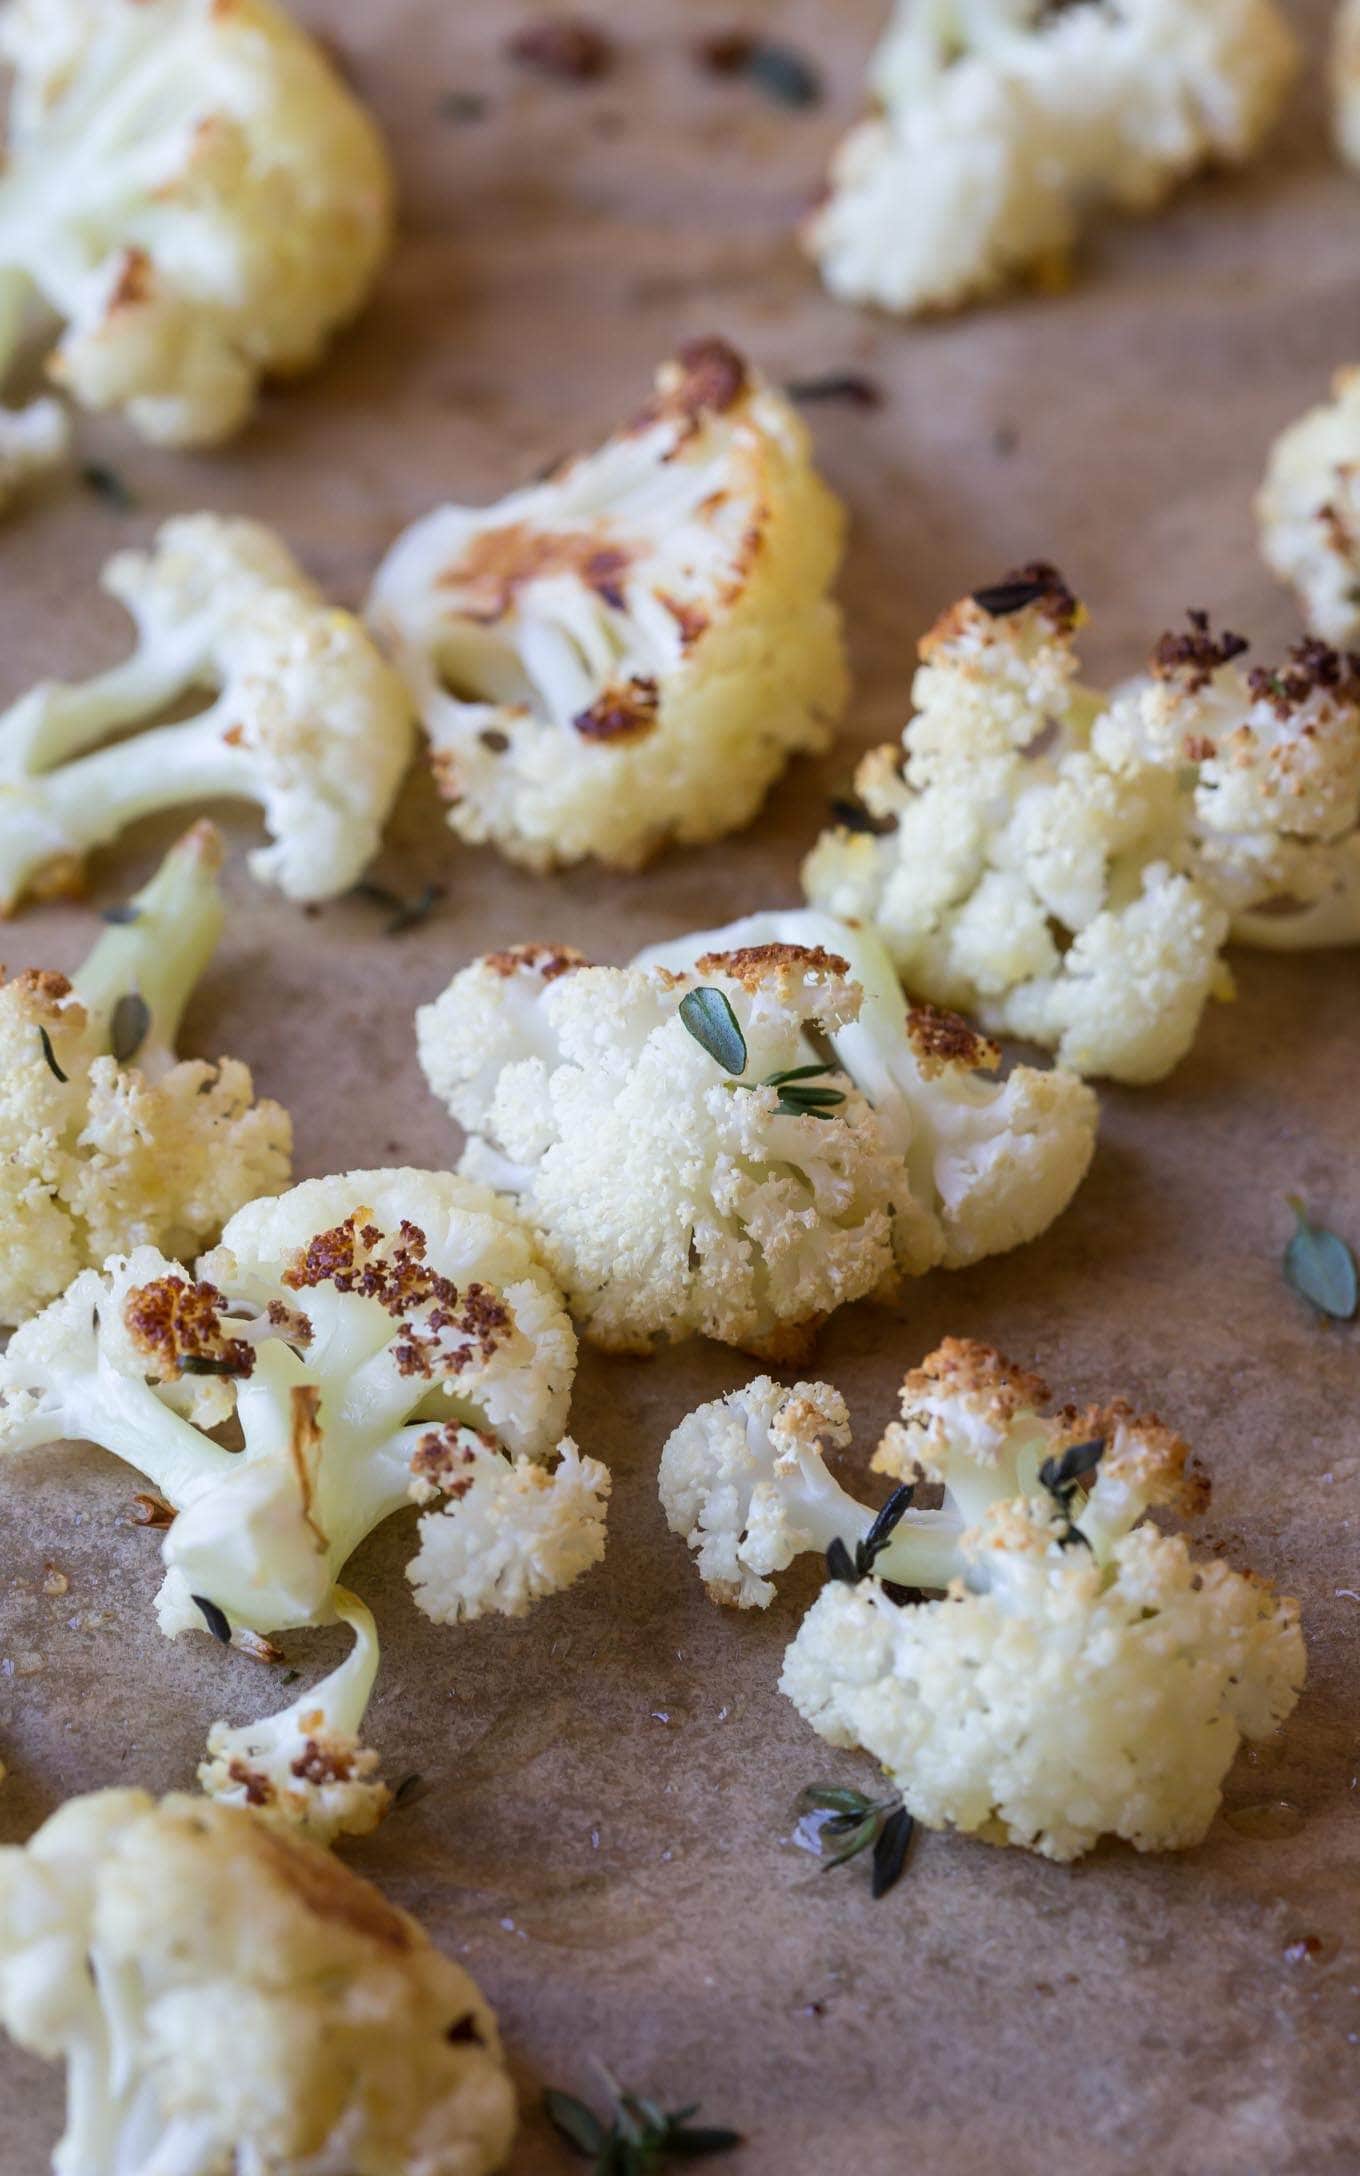  Paleo Roasted Cauliflower with Lemon,Thyme and Garlic, make it easily in the oven! This recipe is also Whole30, vegan and low carb.